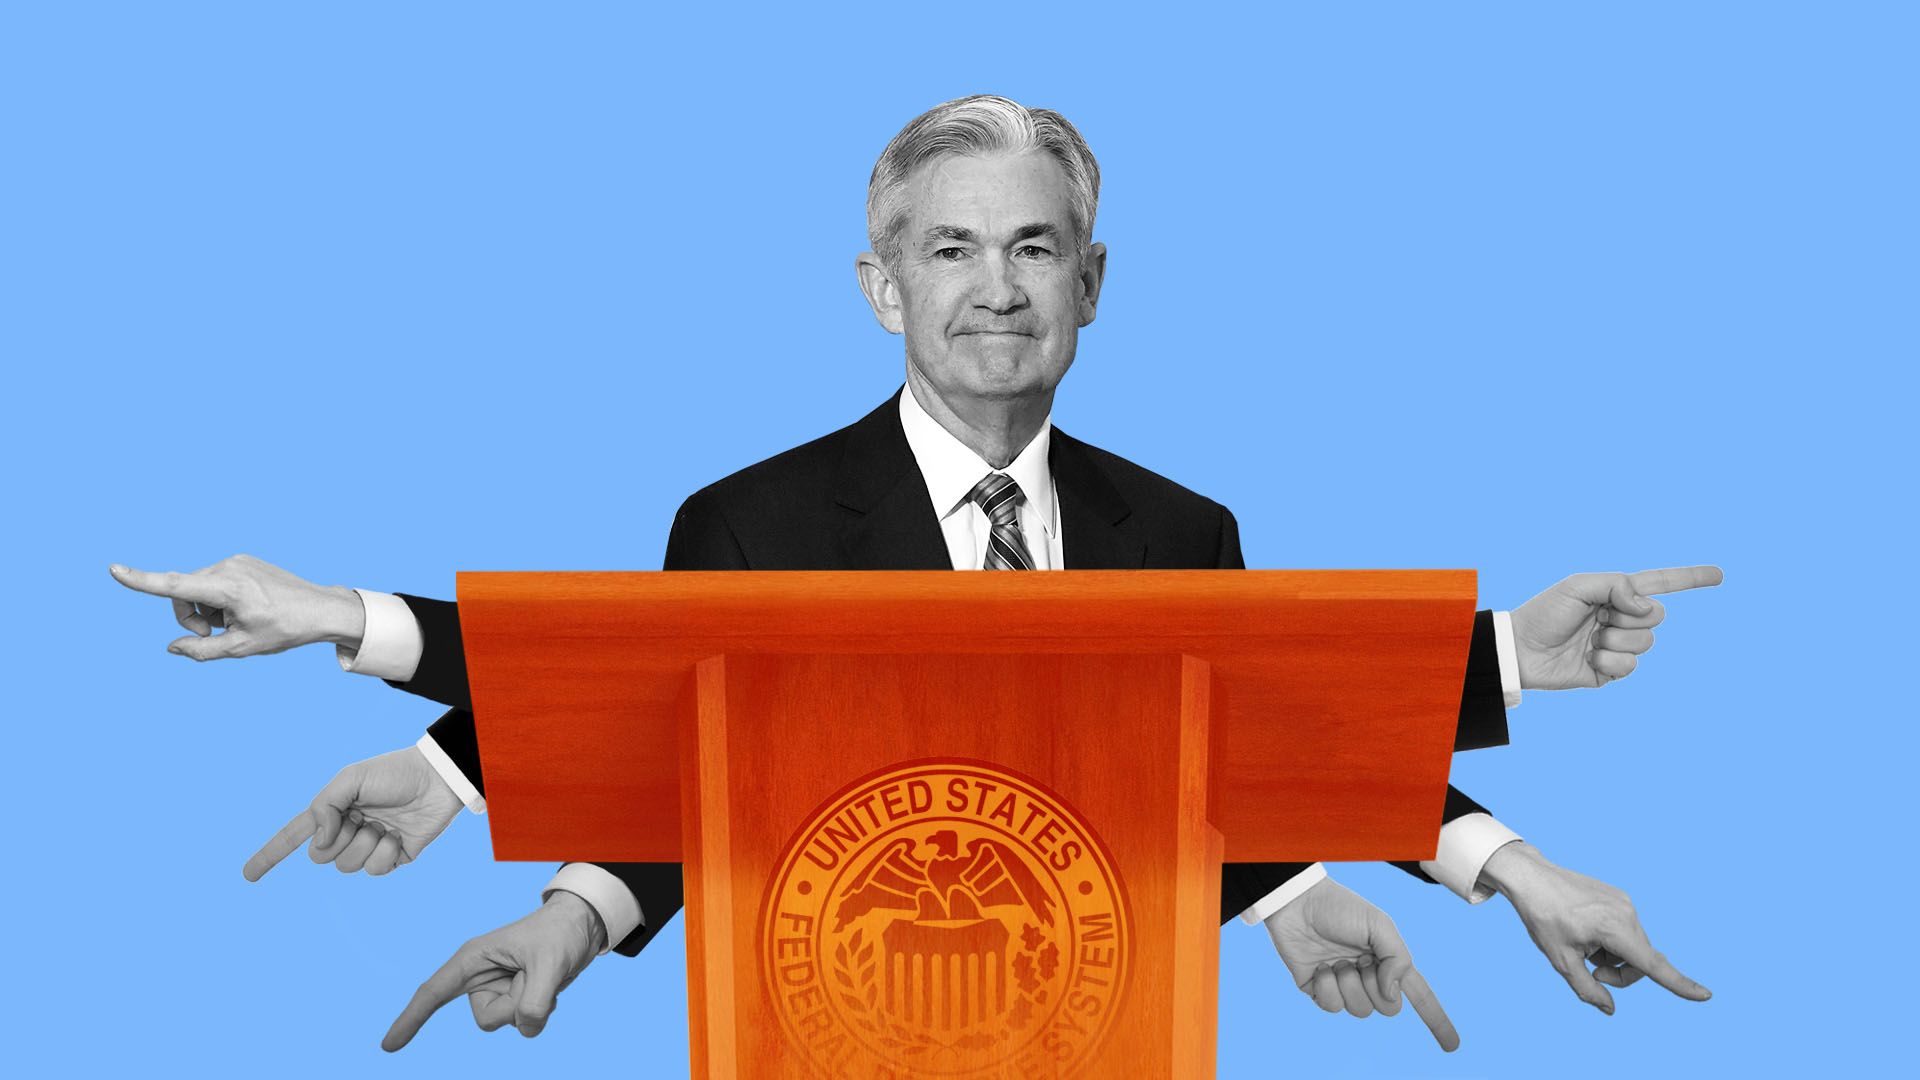 Illustration of Jerome Powell standing behind a podium, with multiple hands pointing in different directions